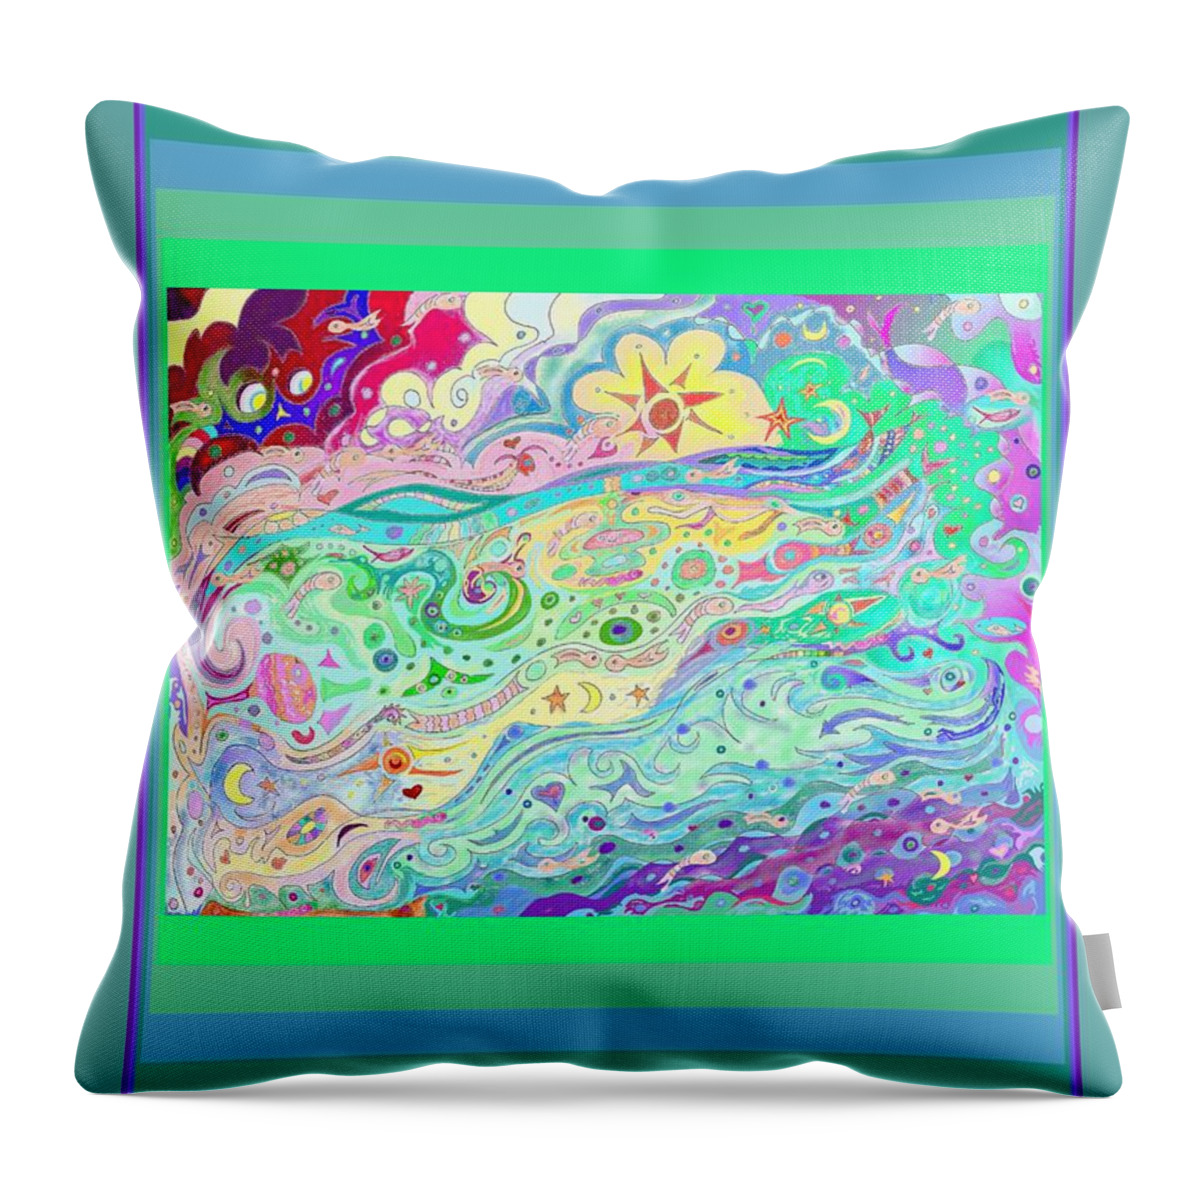 Beltaine Throw Pillow featuring the drawing Beltaine Seashore Dreaming by Julia Woodman